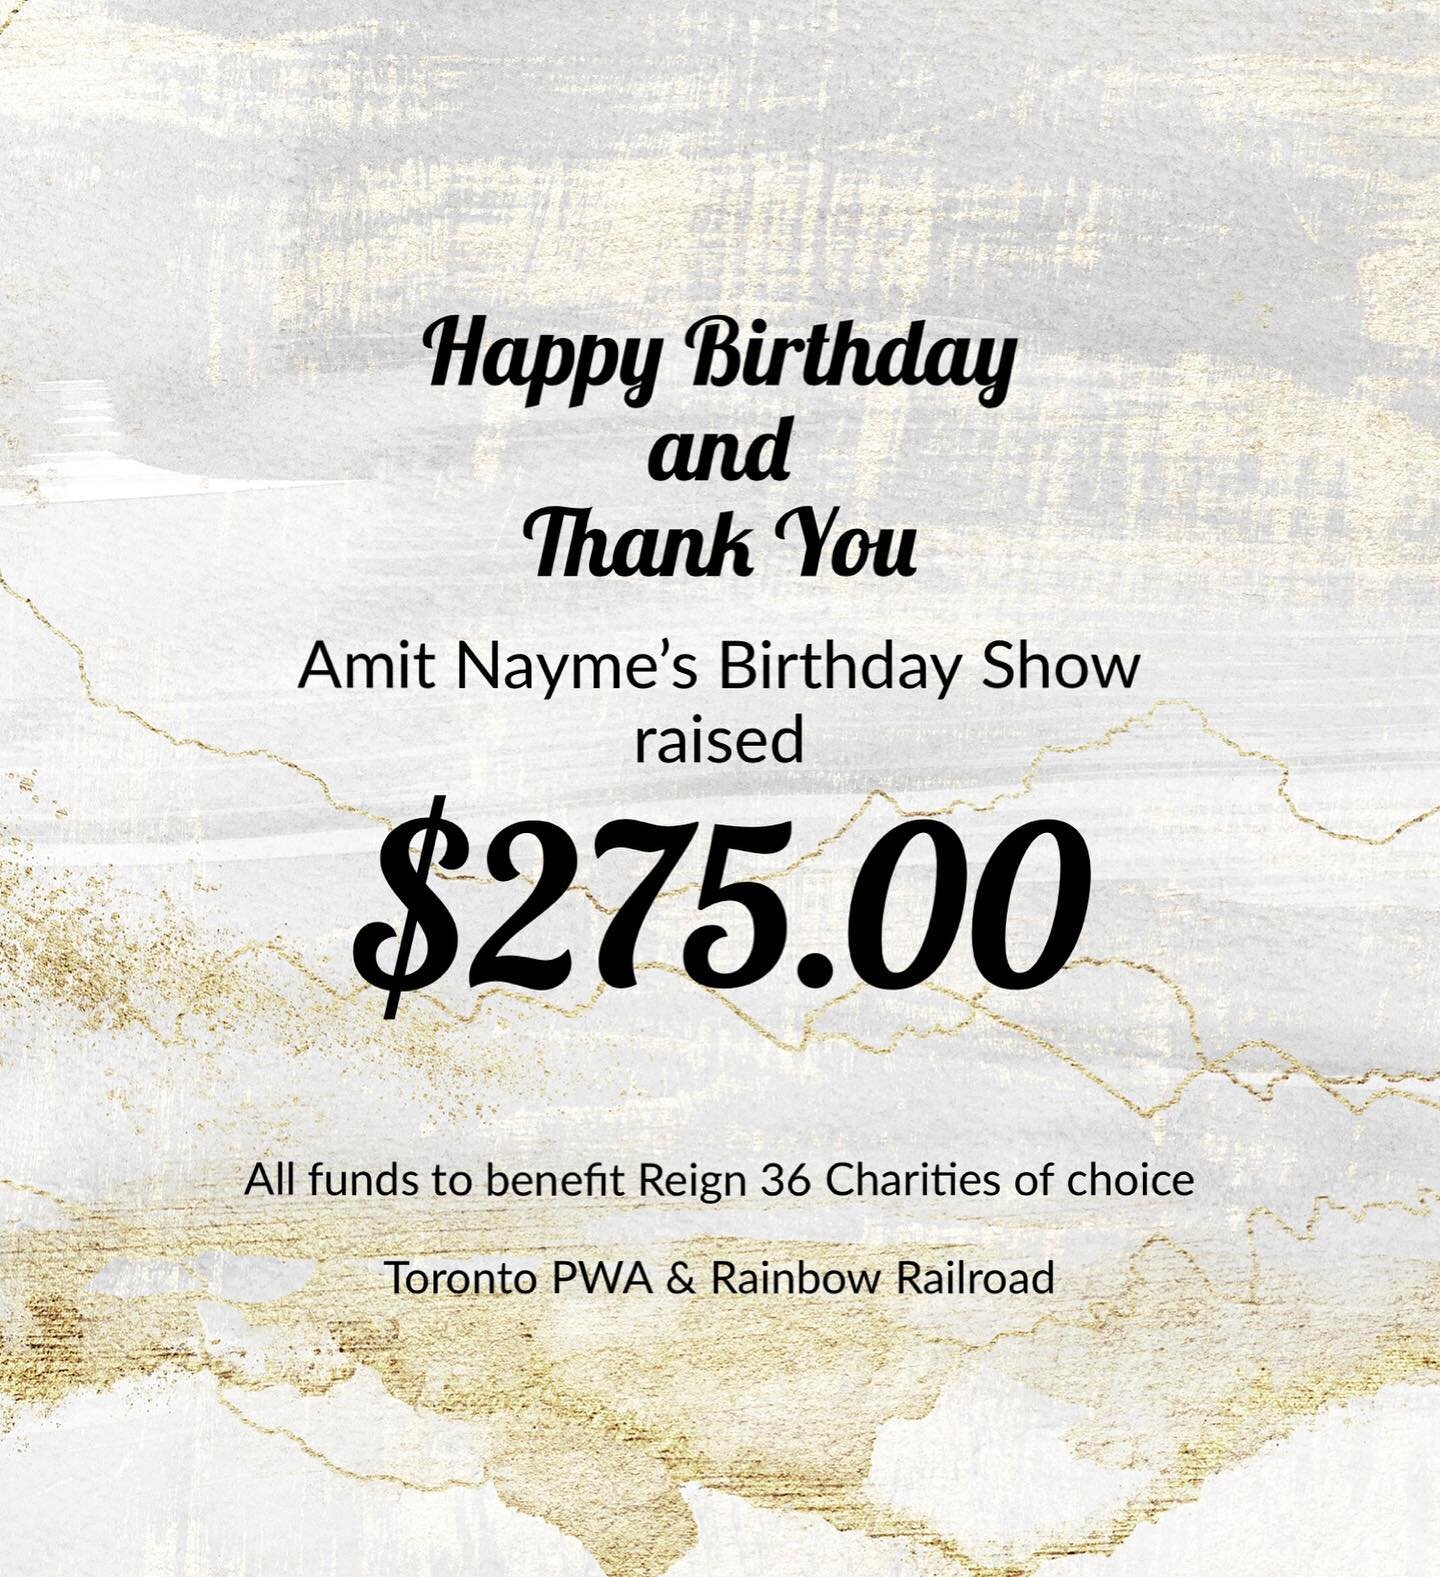 Thank you Anita for sharing your birthday with us and helping us raise money for charity. Thank you to all who supported and performed. Happy Birthday! 

#birthday #fundraiser #charity #supportlocal #supportlocalbusiness #strongertogether #toronto #c